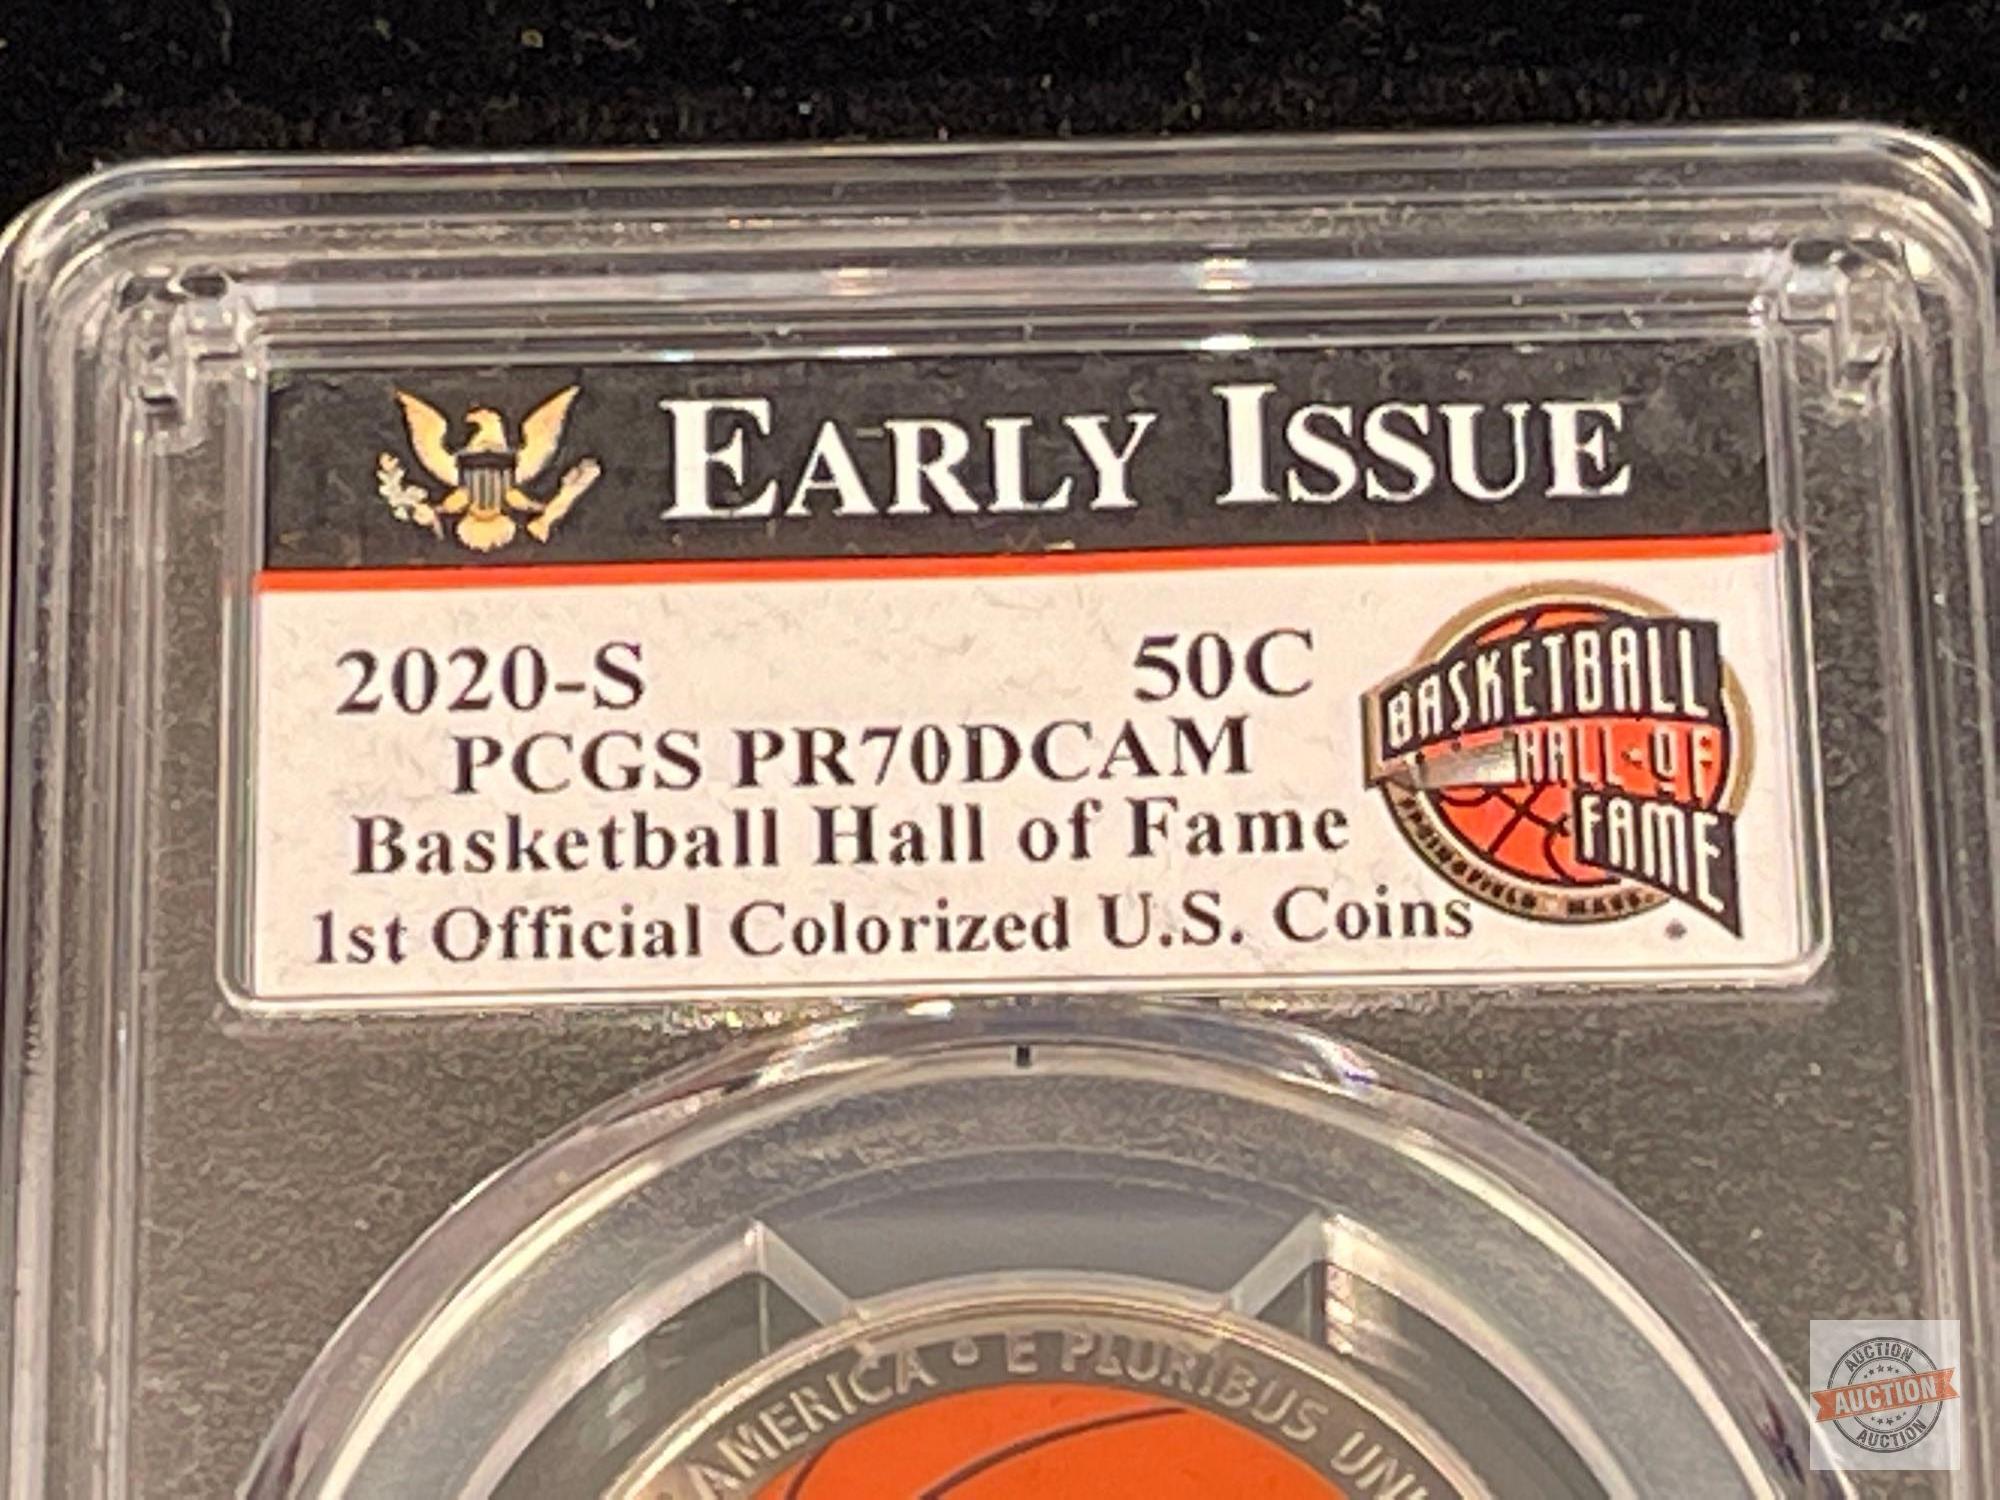 Silver Dollar 2020p and Half-Dollar 2020s are "Early Issue" coins PR 70 quality, colorized & sealed